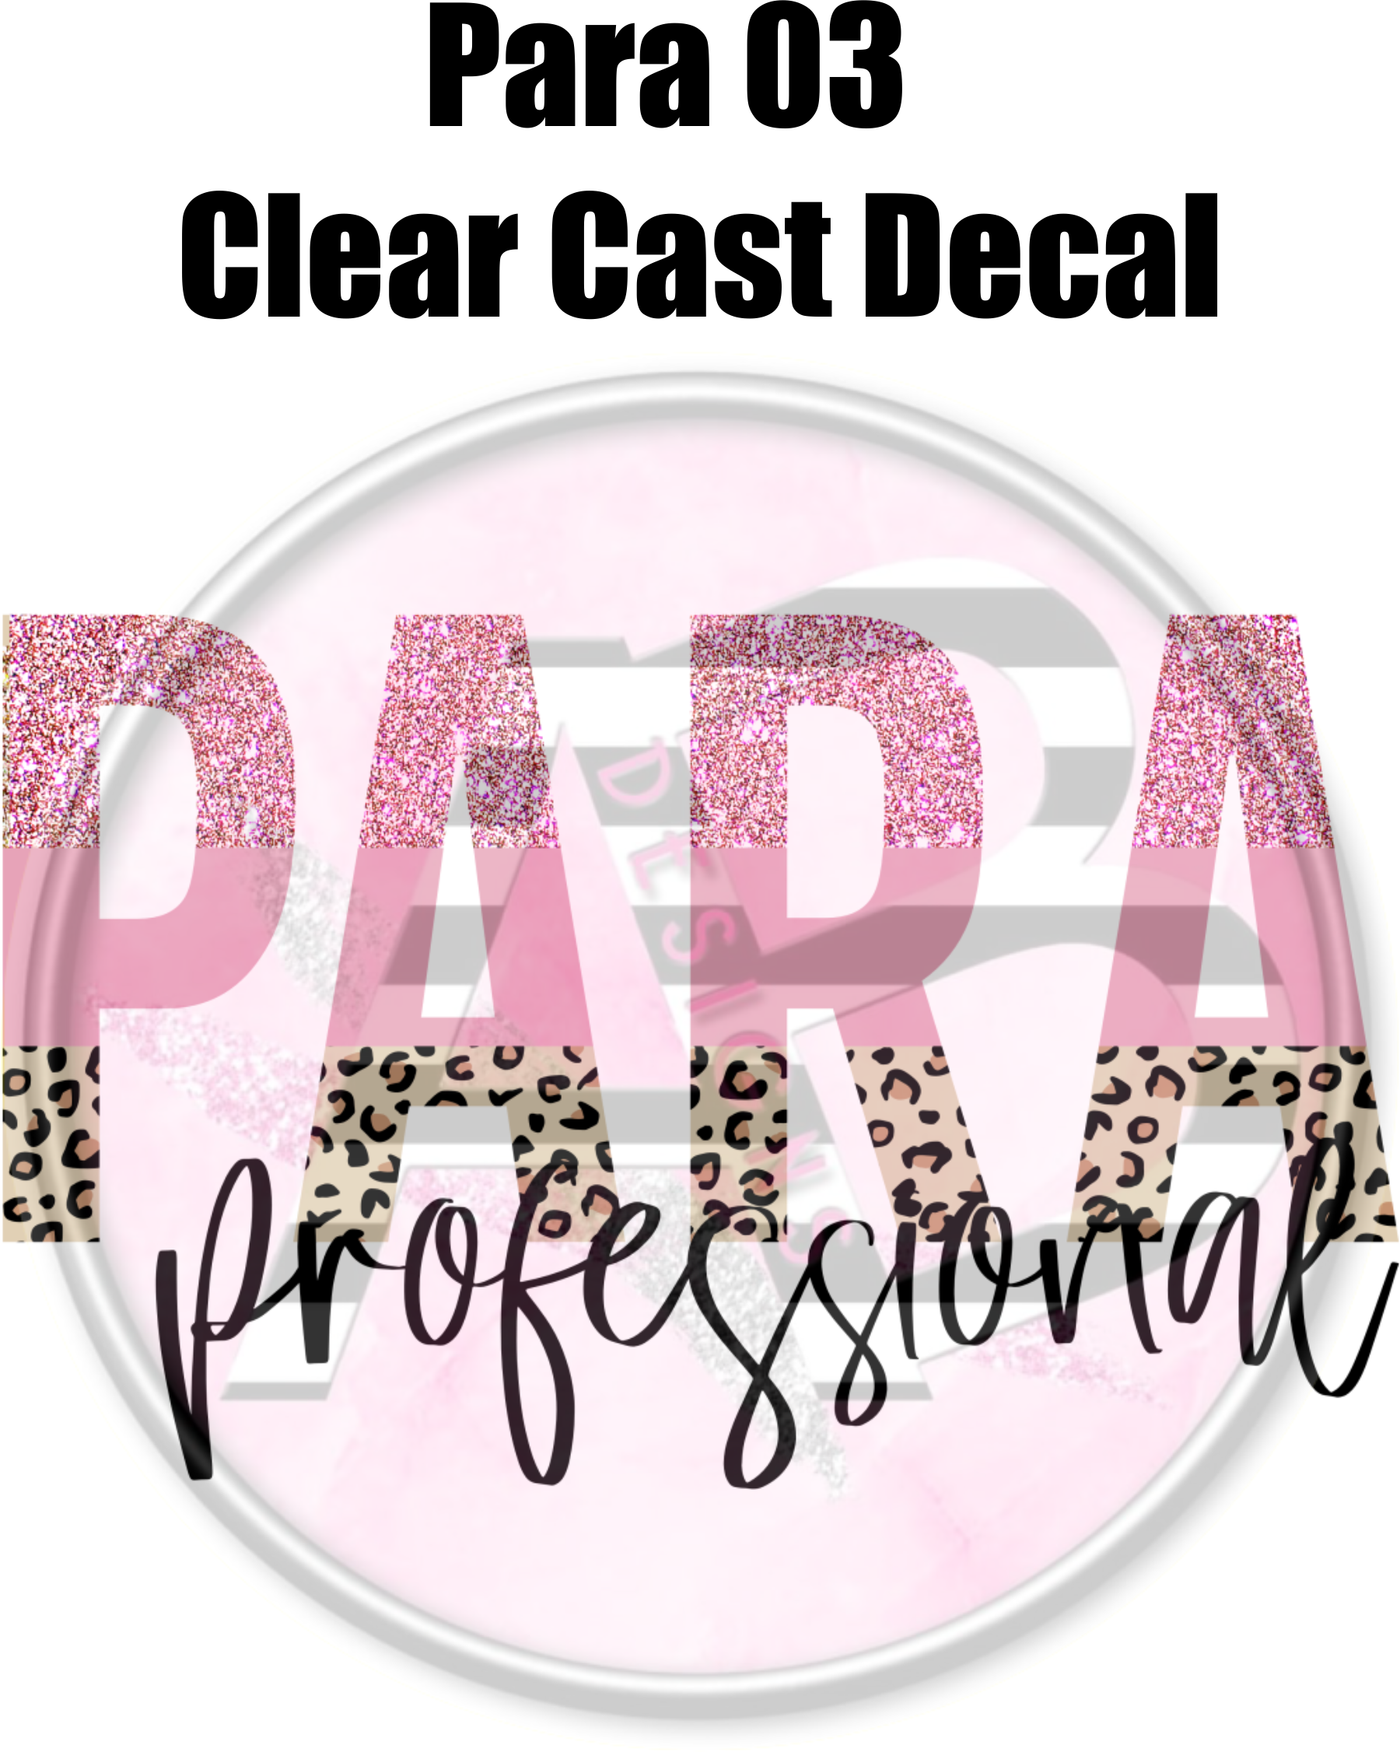 Para 03 - Clear Cast Decal